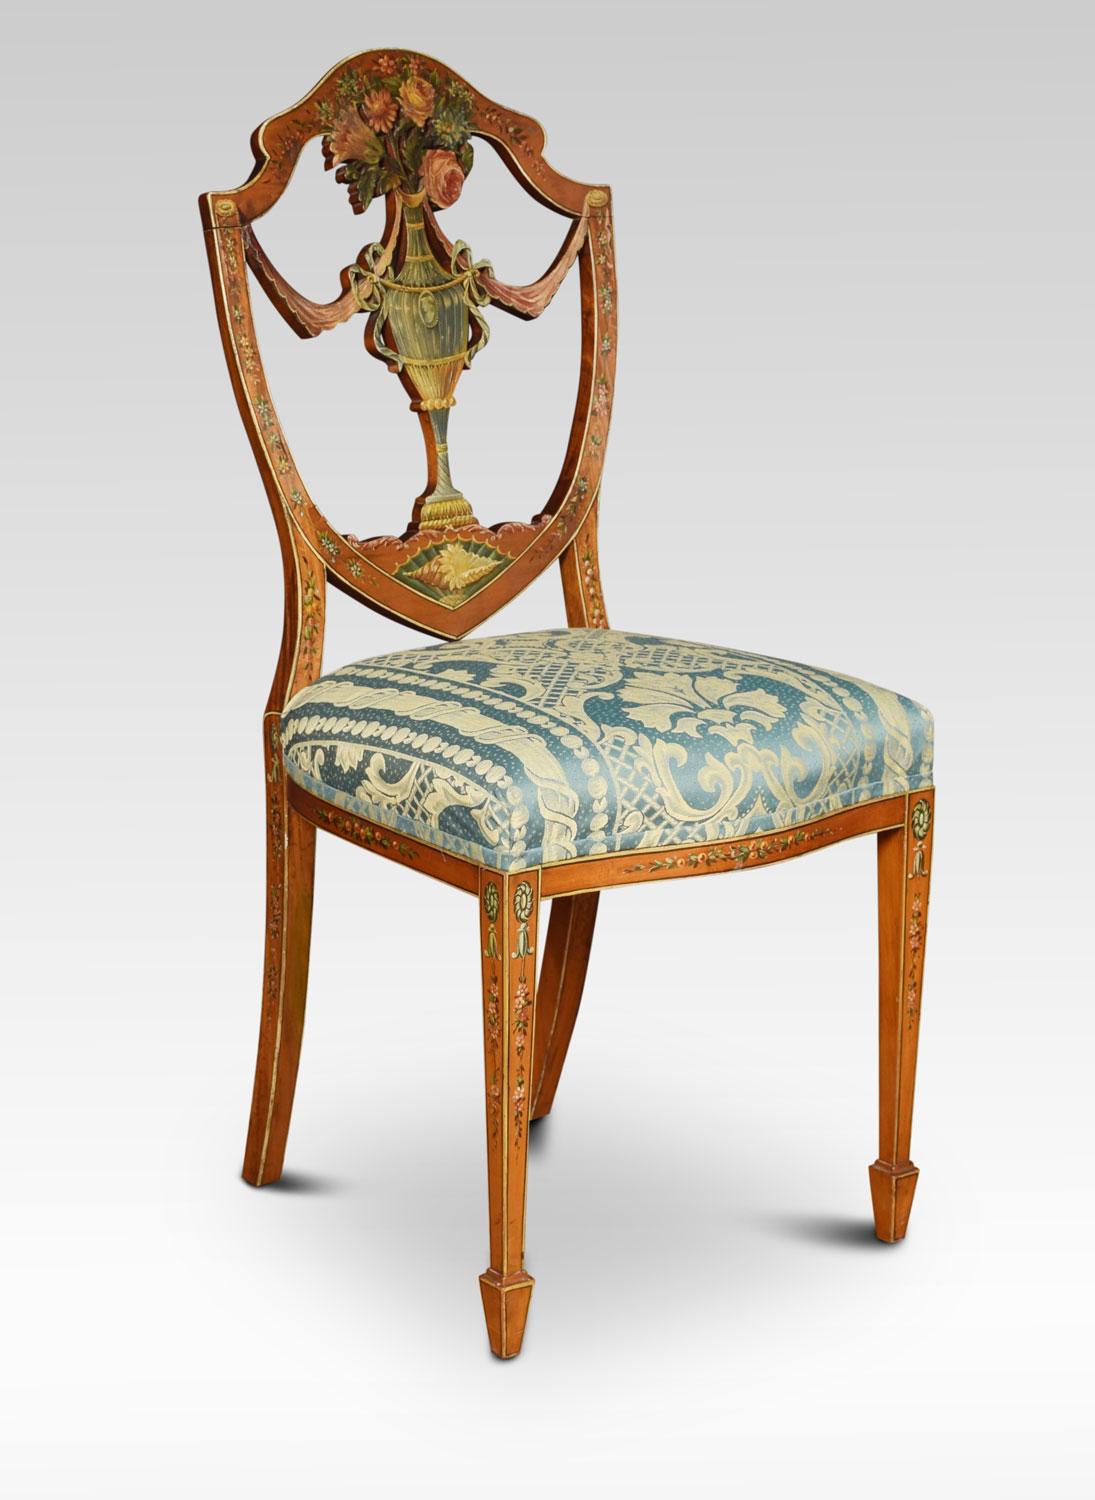 Late 19th century Sheraton revival satinwood side chair, painted overall with flowers and leaves, the shield shaped back with pierced splat above padded seat all raised up on tapering legs terminating in spade feet.
Dimensions:
Height 38 inches